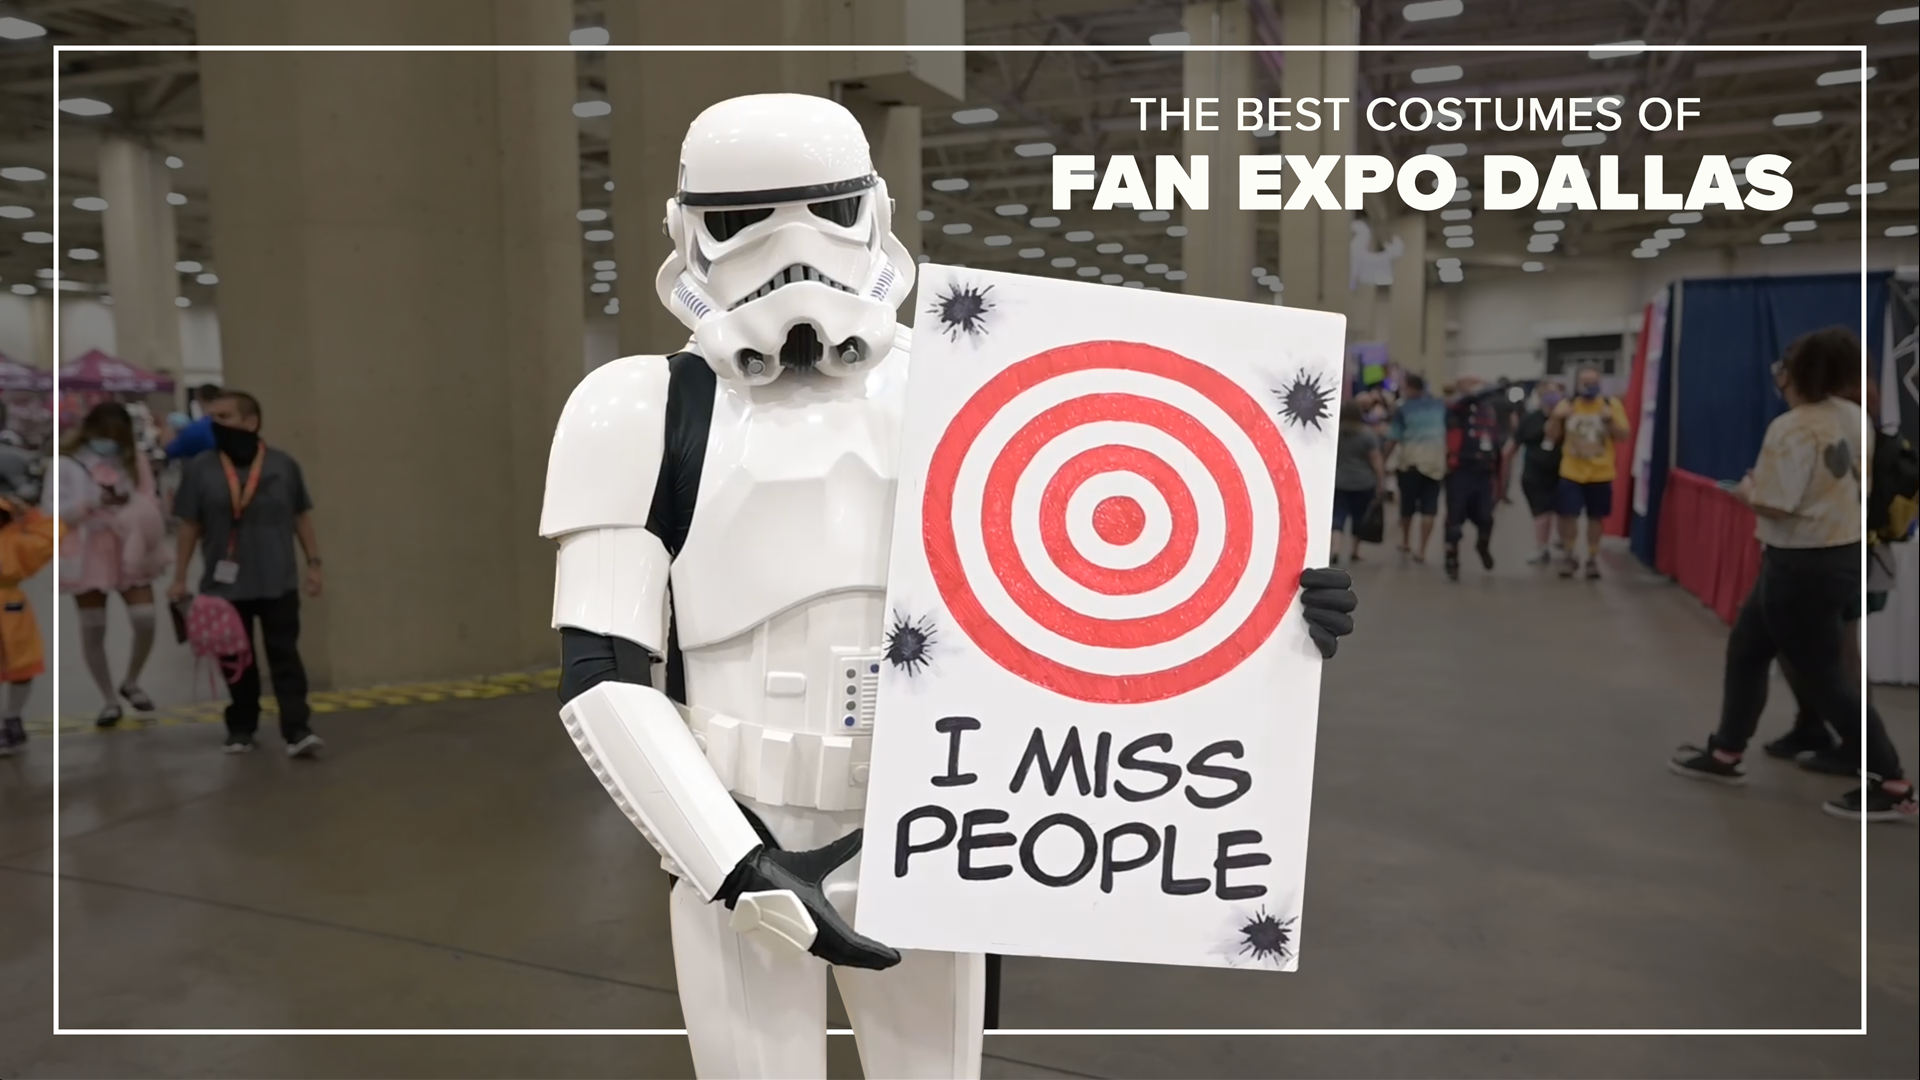 It's not just concerts that are coming back. Some of the best local area cosplayers showed off their hard work at Fan Expo Dallas last weekend.